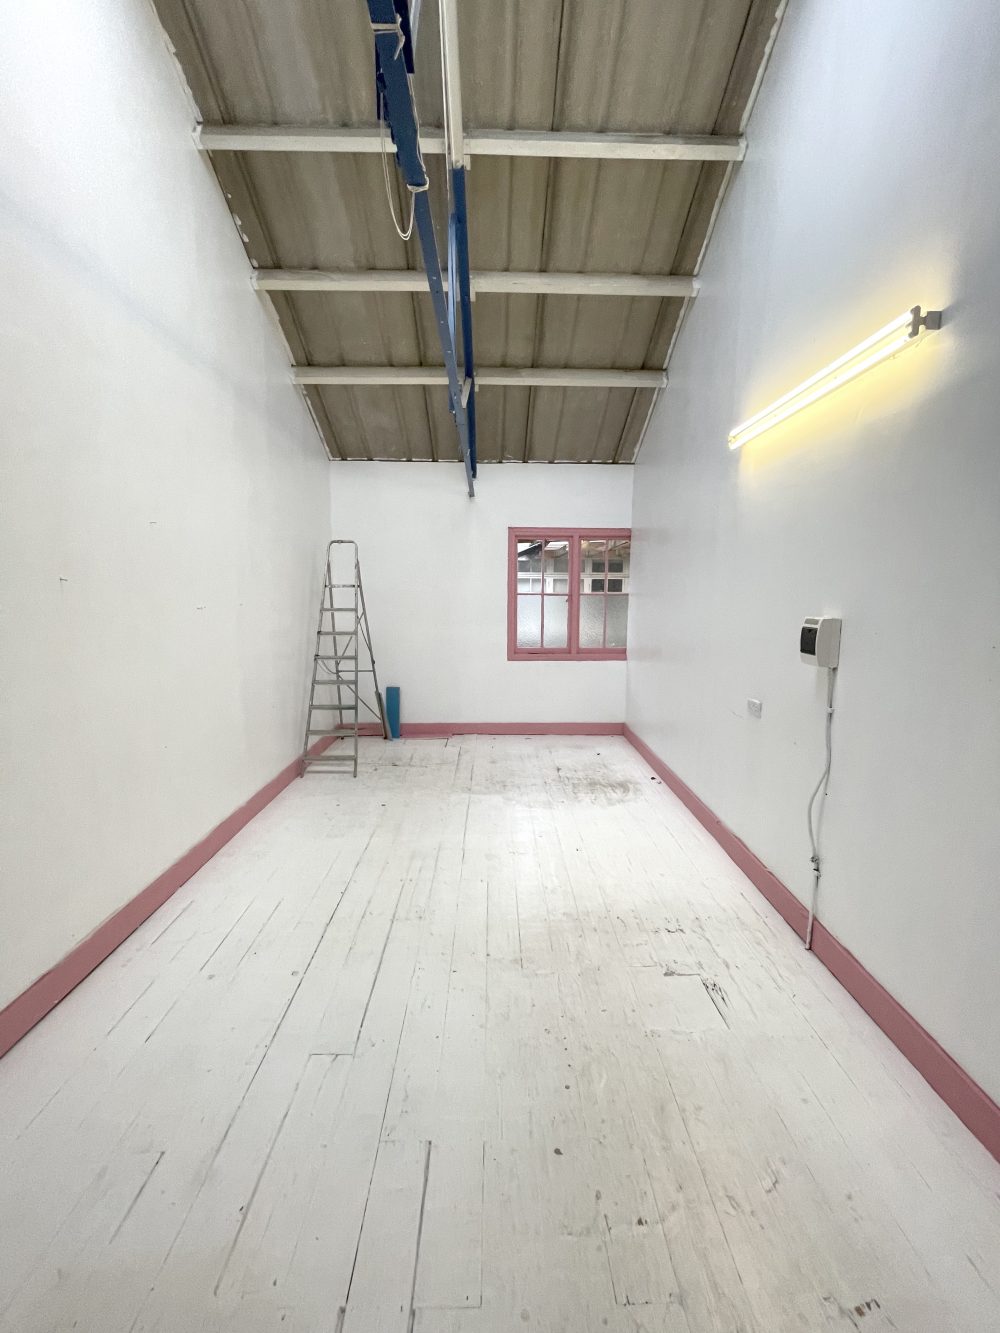 first floor light idustrial creative artist studio to rent in N16 Stoke Newington Shelford Place Pic4